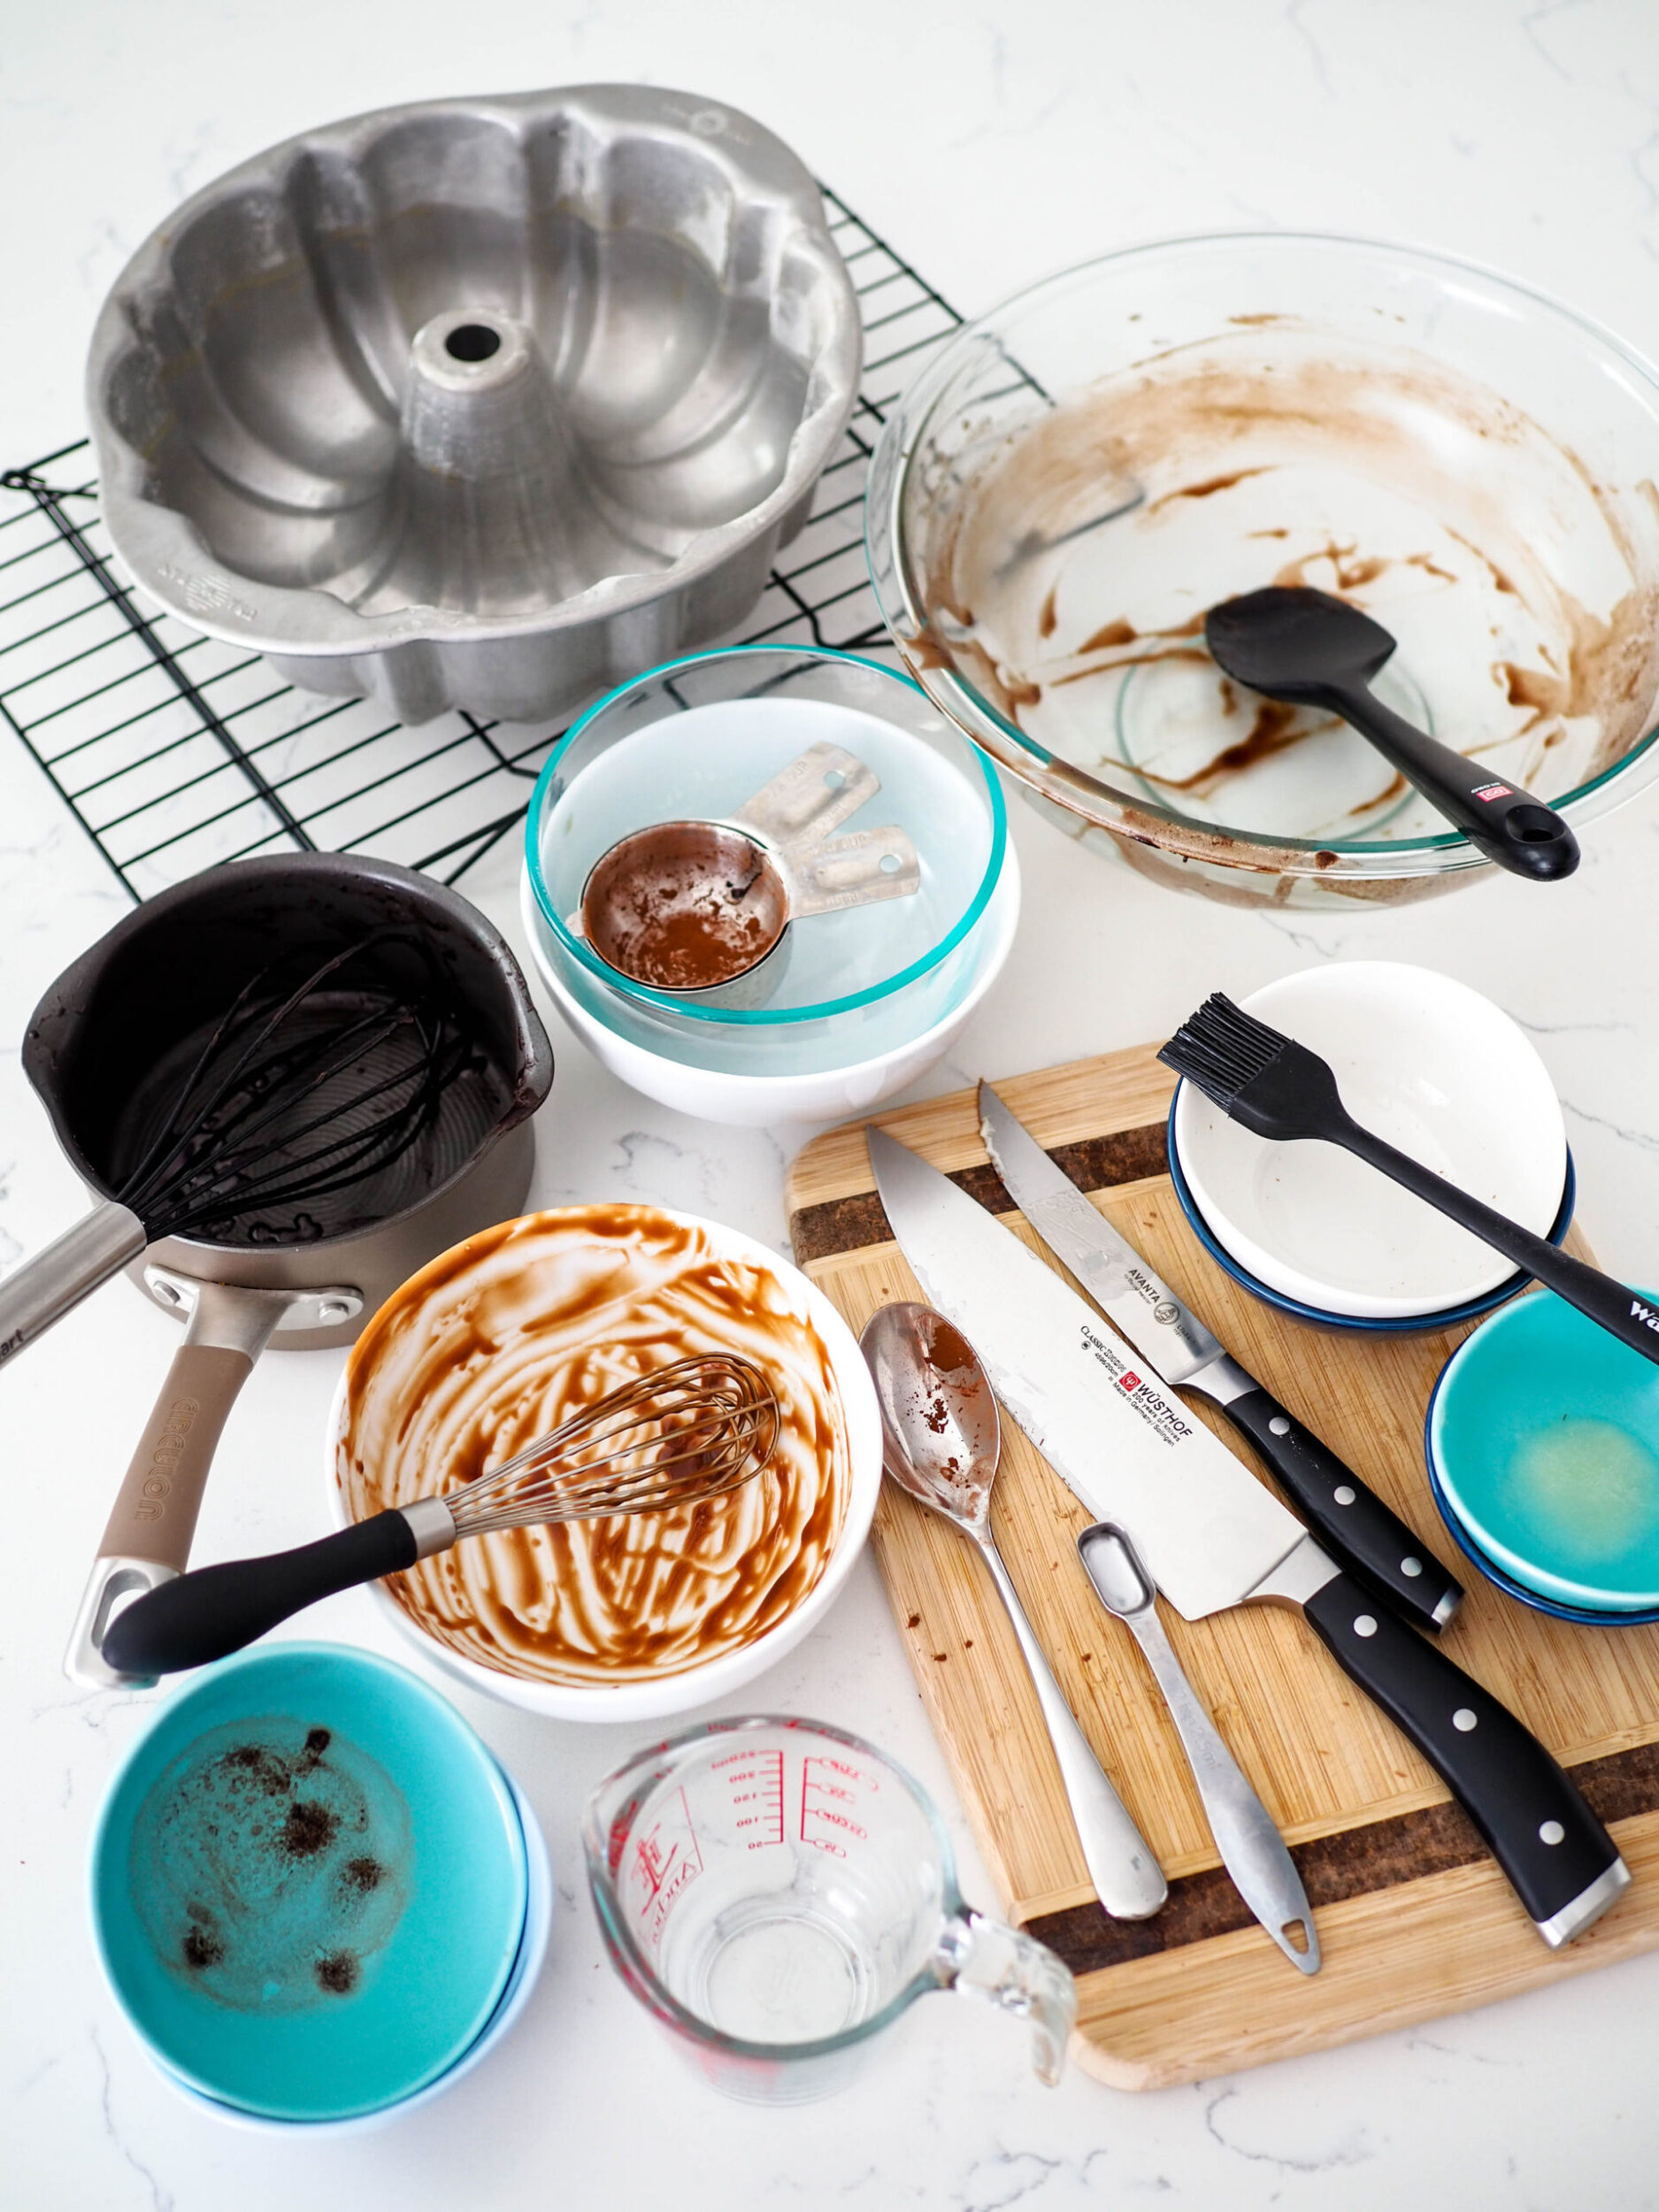 Dishes used to make the chocolate Bundt cake piled up on a counter.